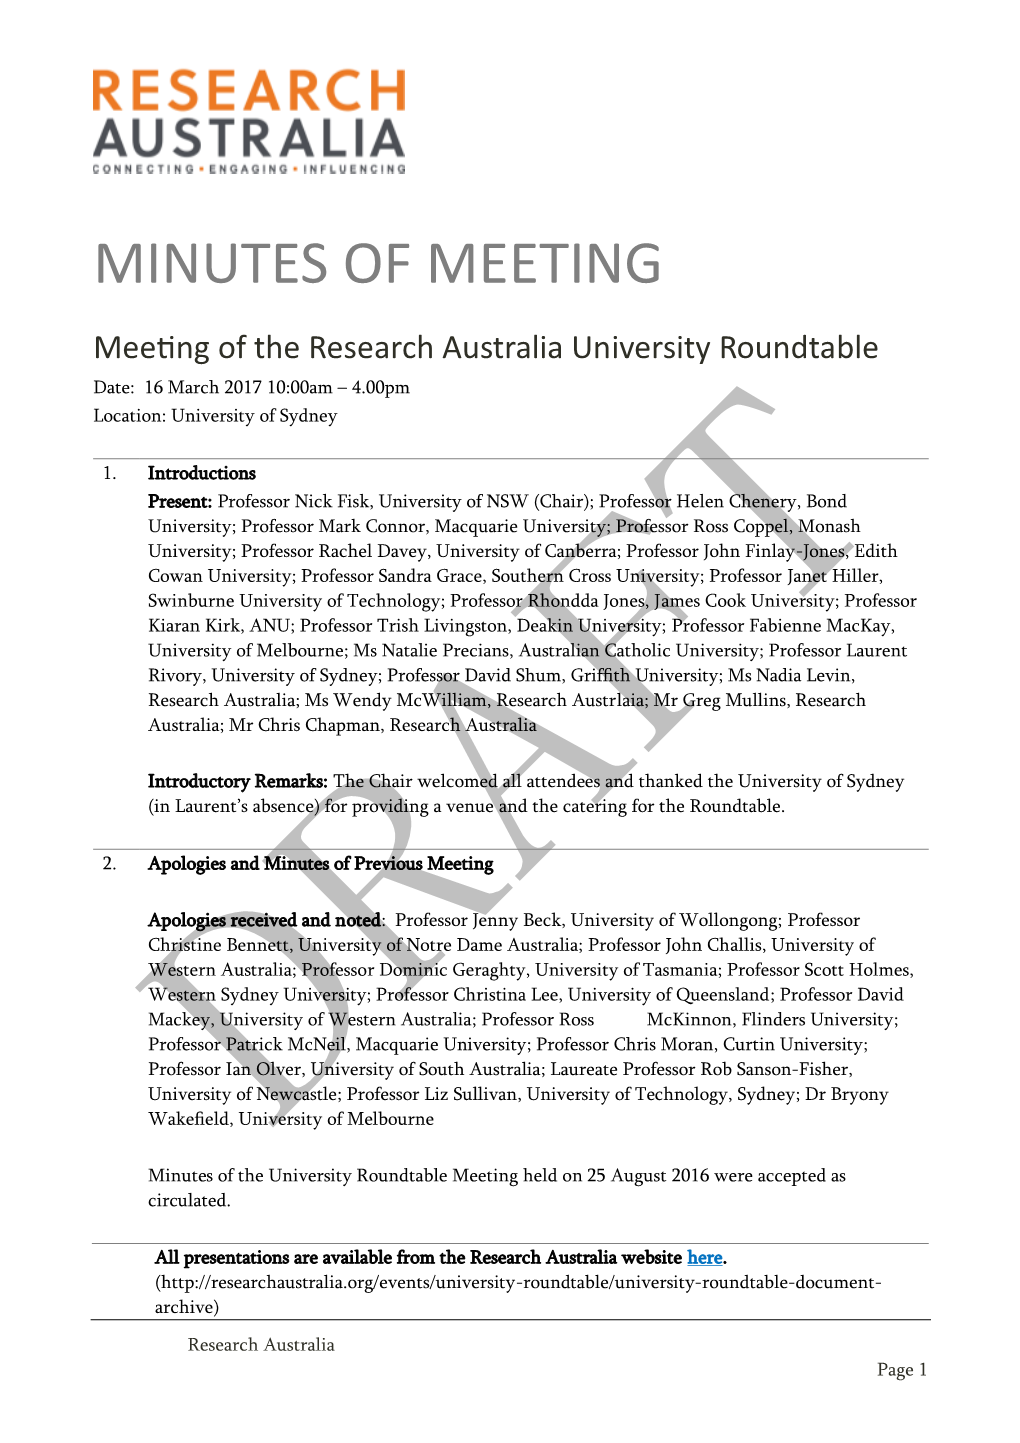 MINUTES of MEETING Meeting of the Research Australia University Roundtable Date: 16 March 2017 10:00Am – 4.00Pm Location: University of Sydney